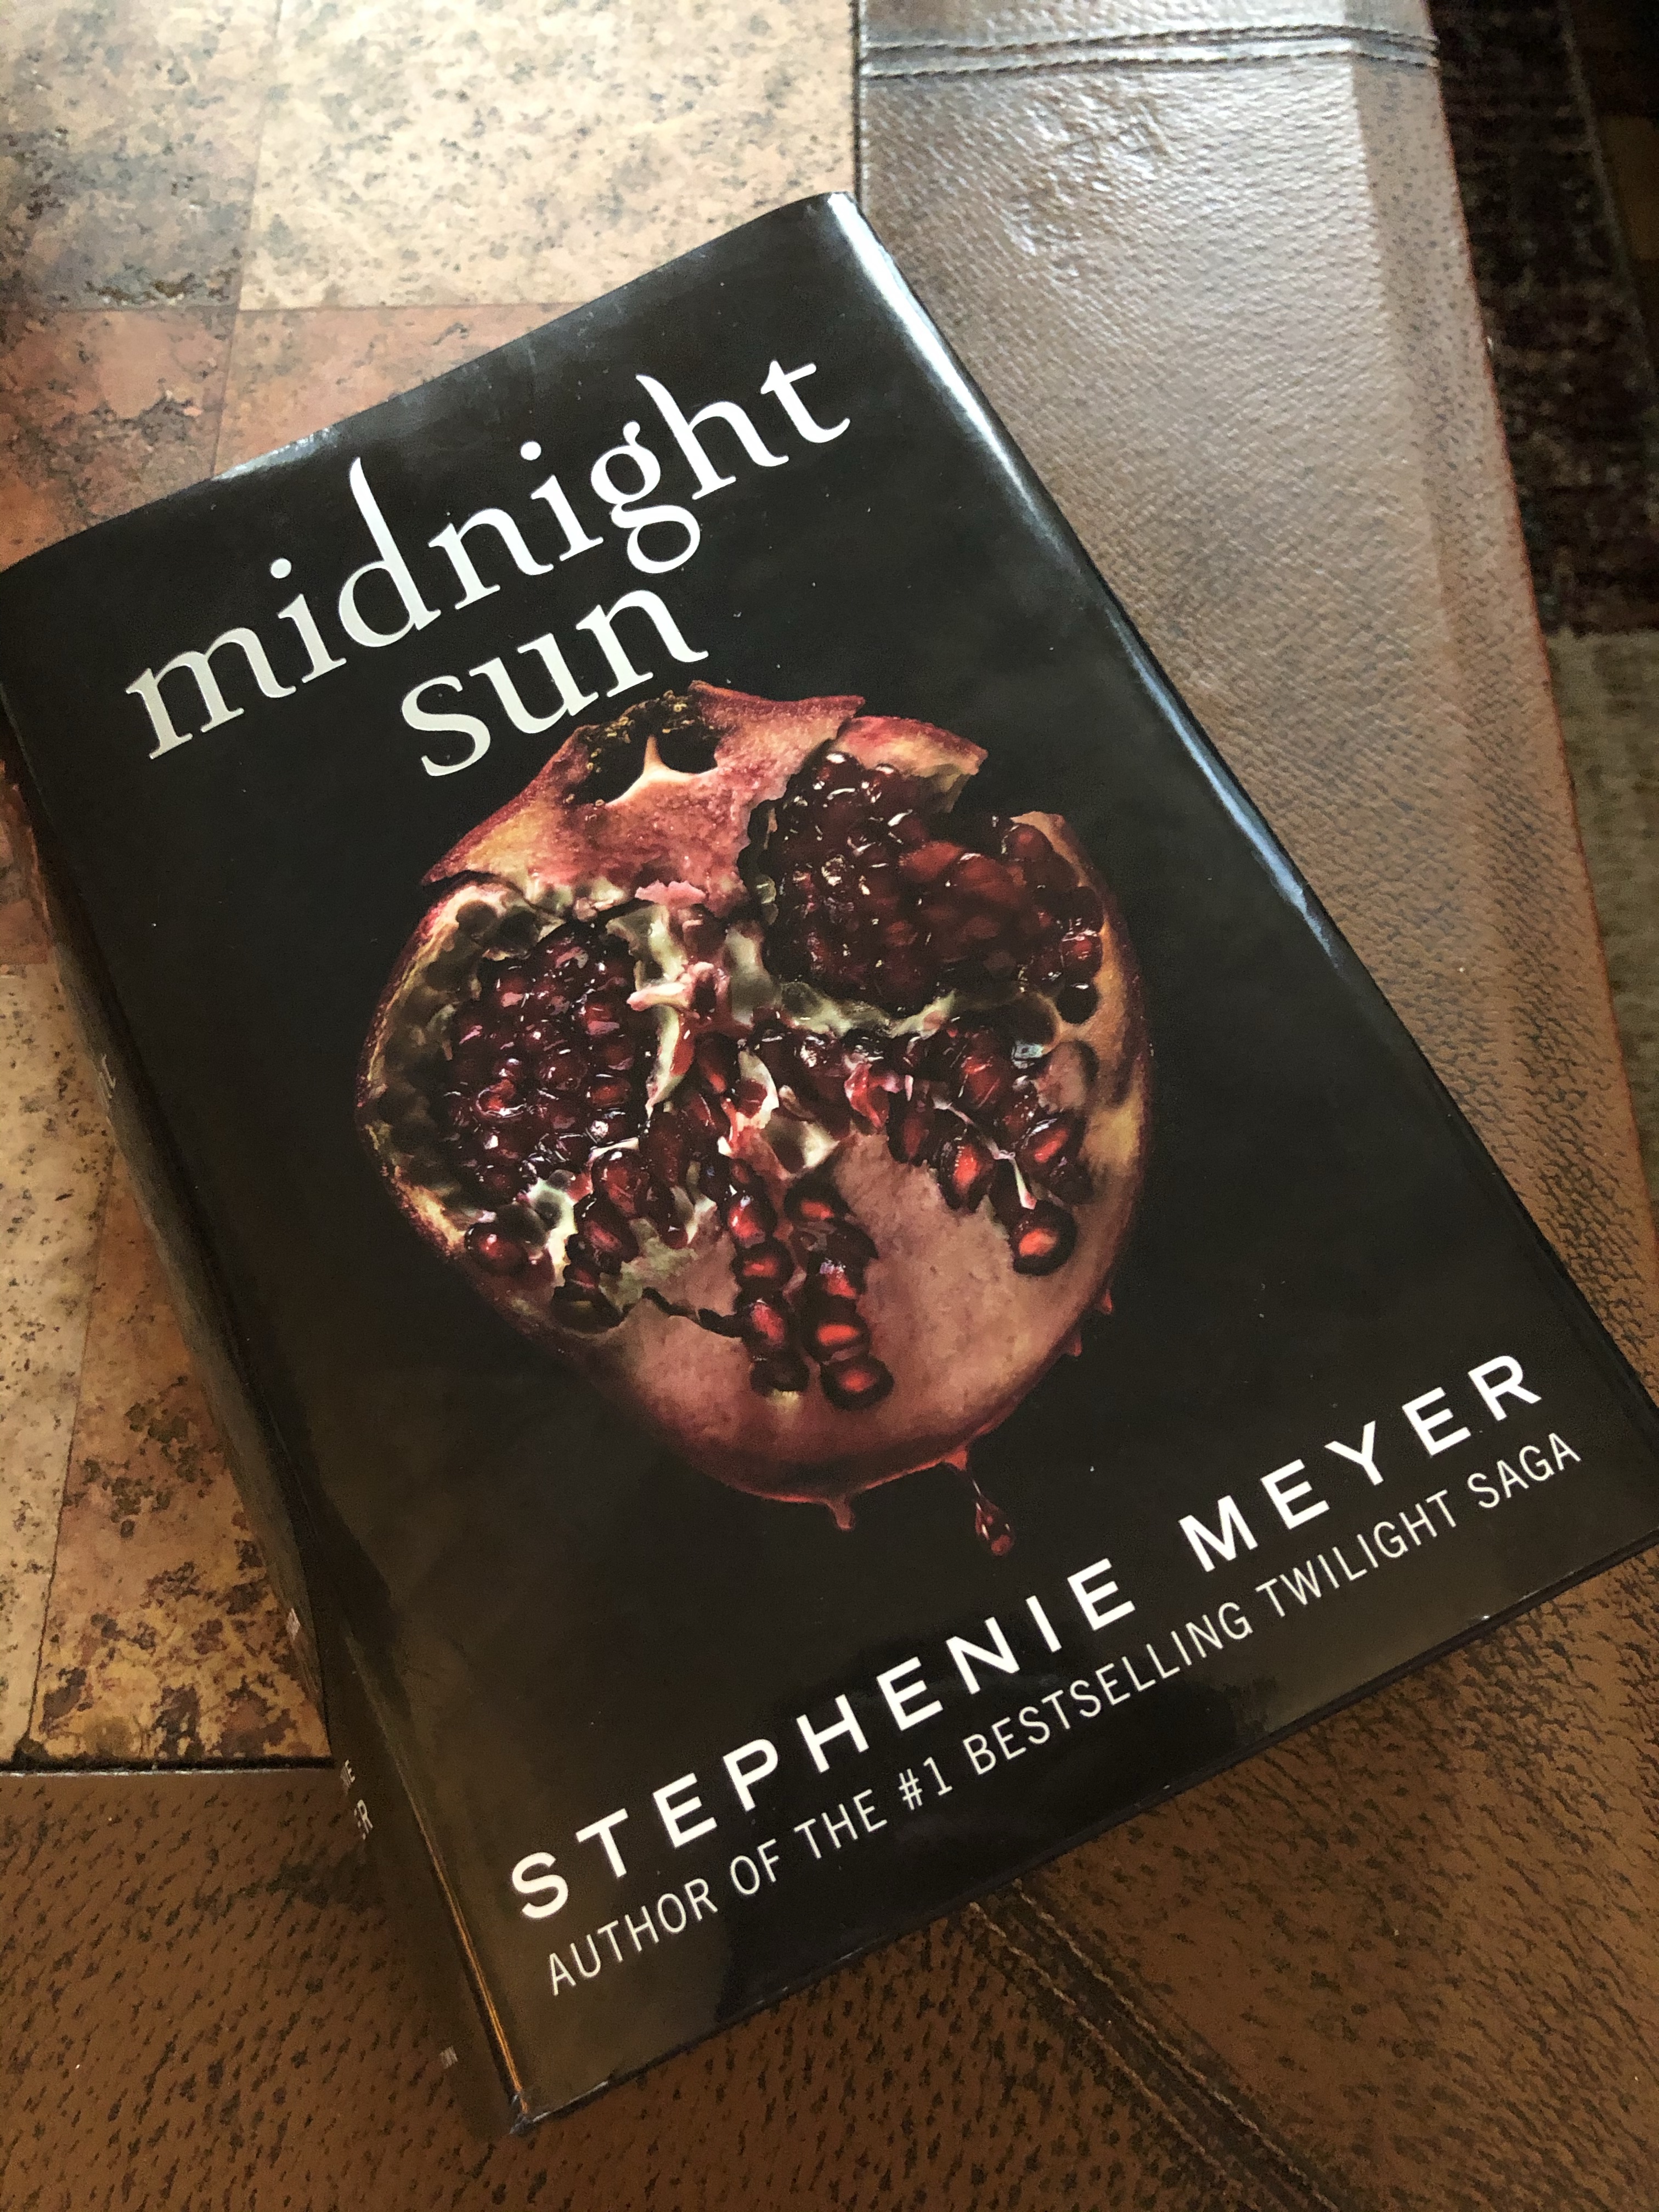 Book Review: Midnight Sun by Stephenie Meyer Copy – Now Playing